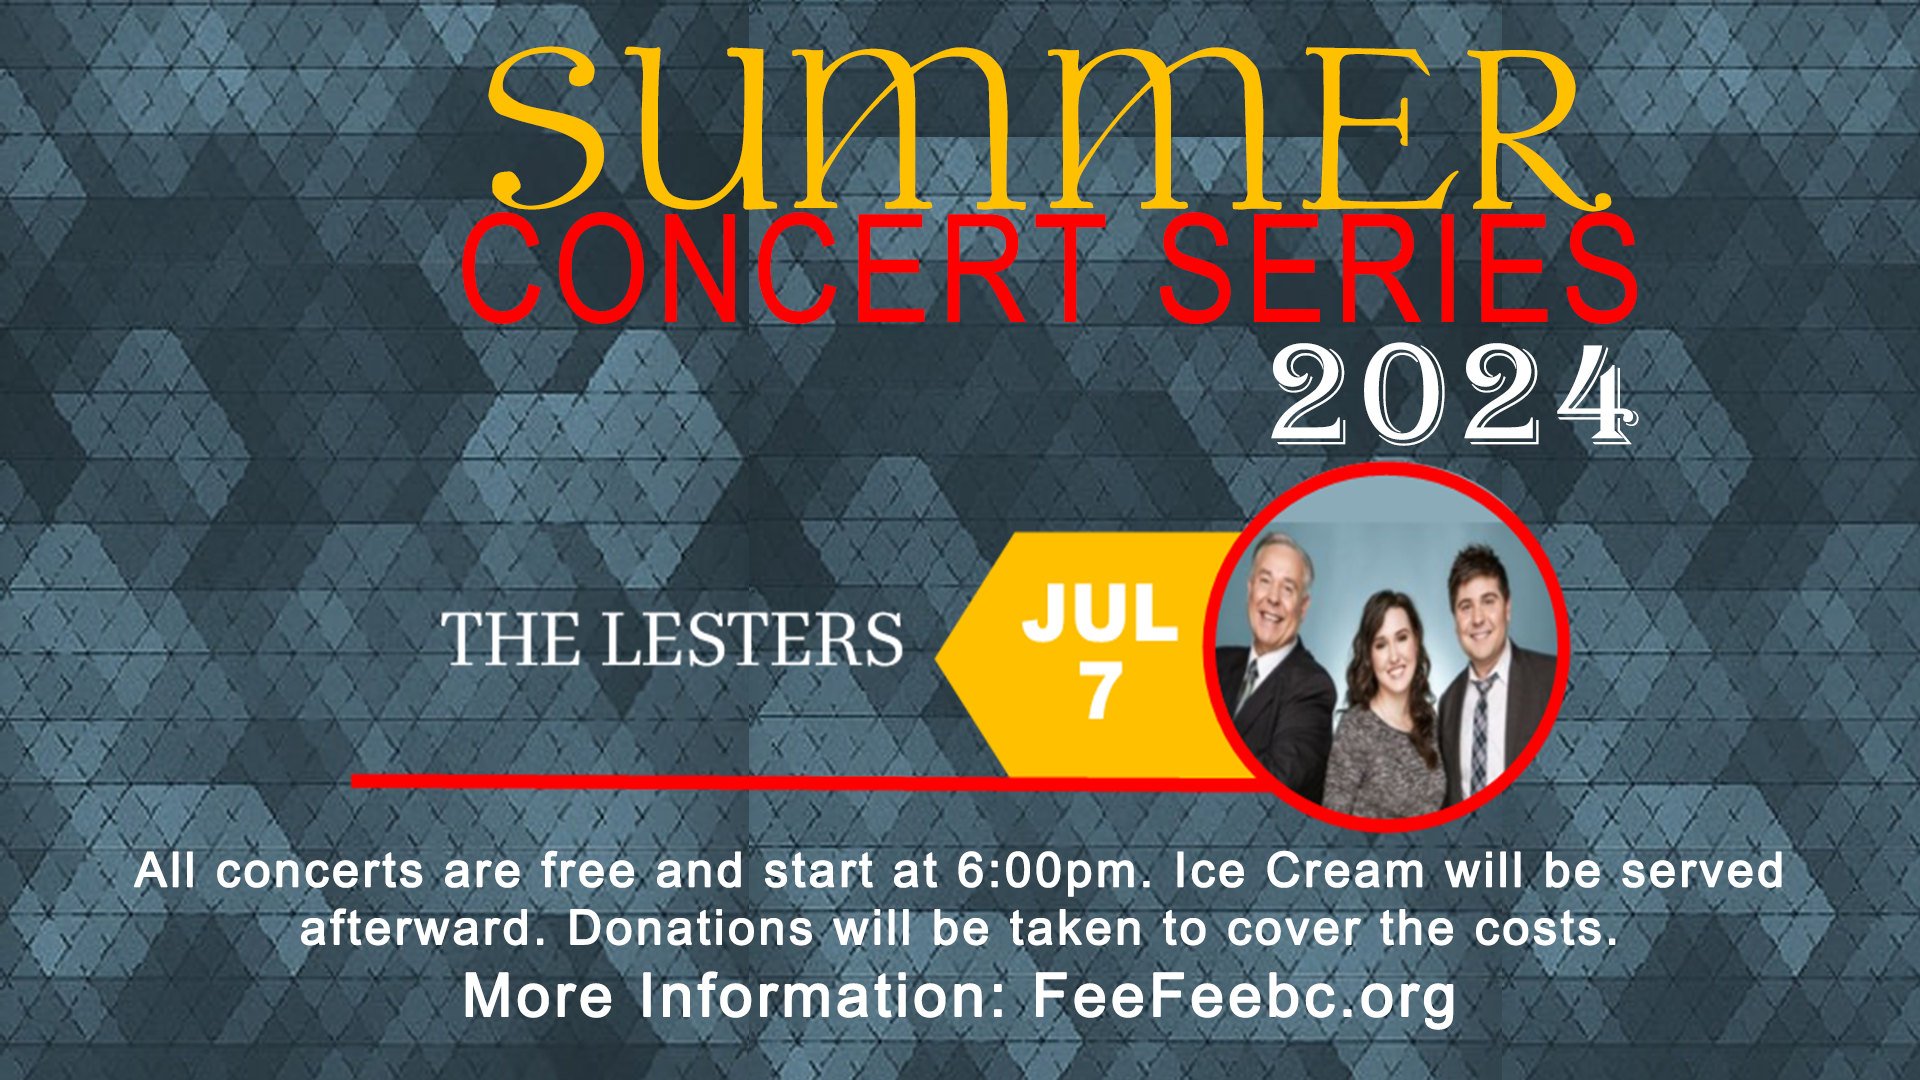 The Lesters - Fee Fee Summer Concert Series